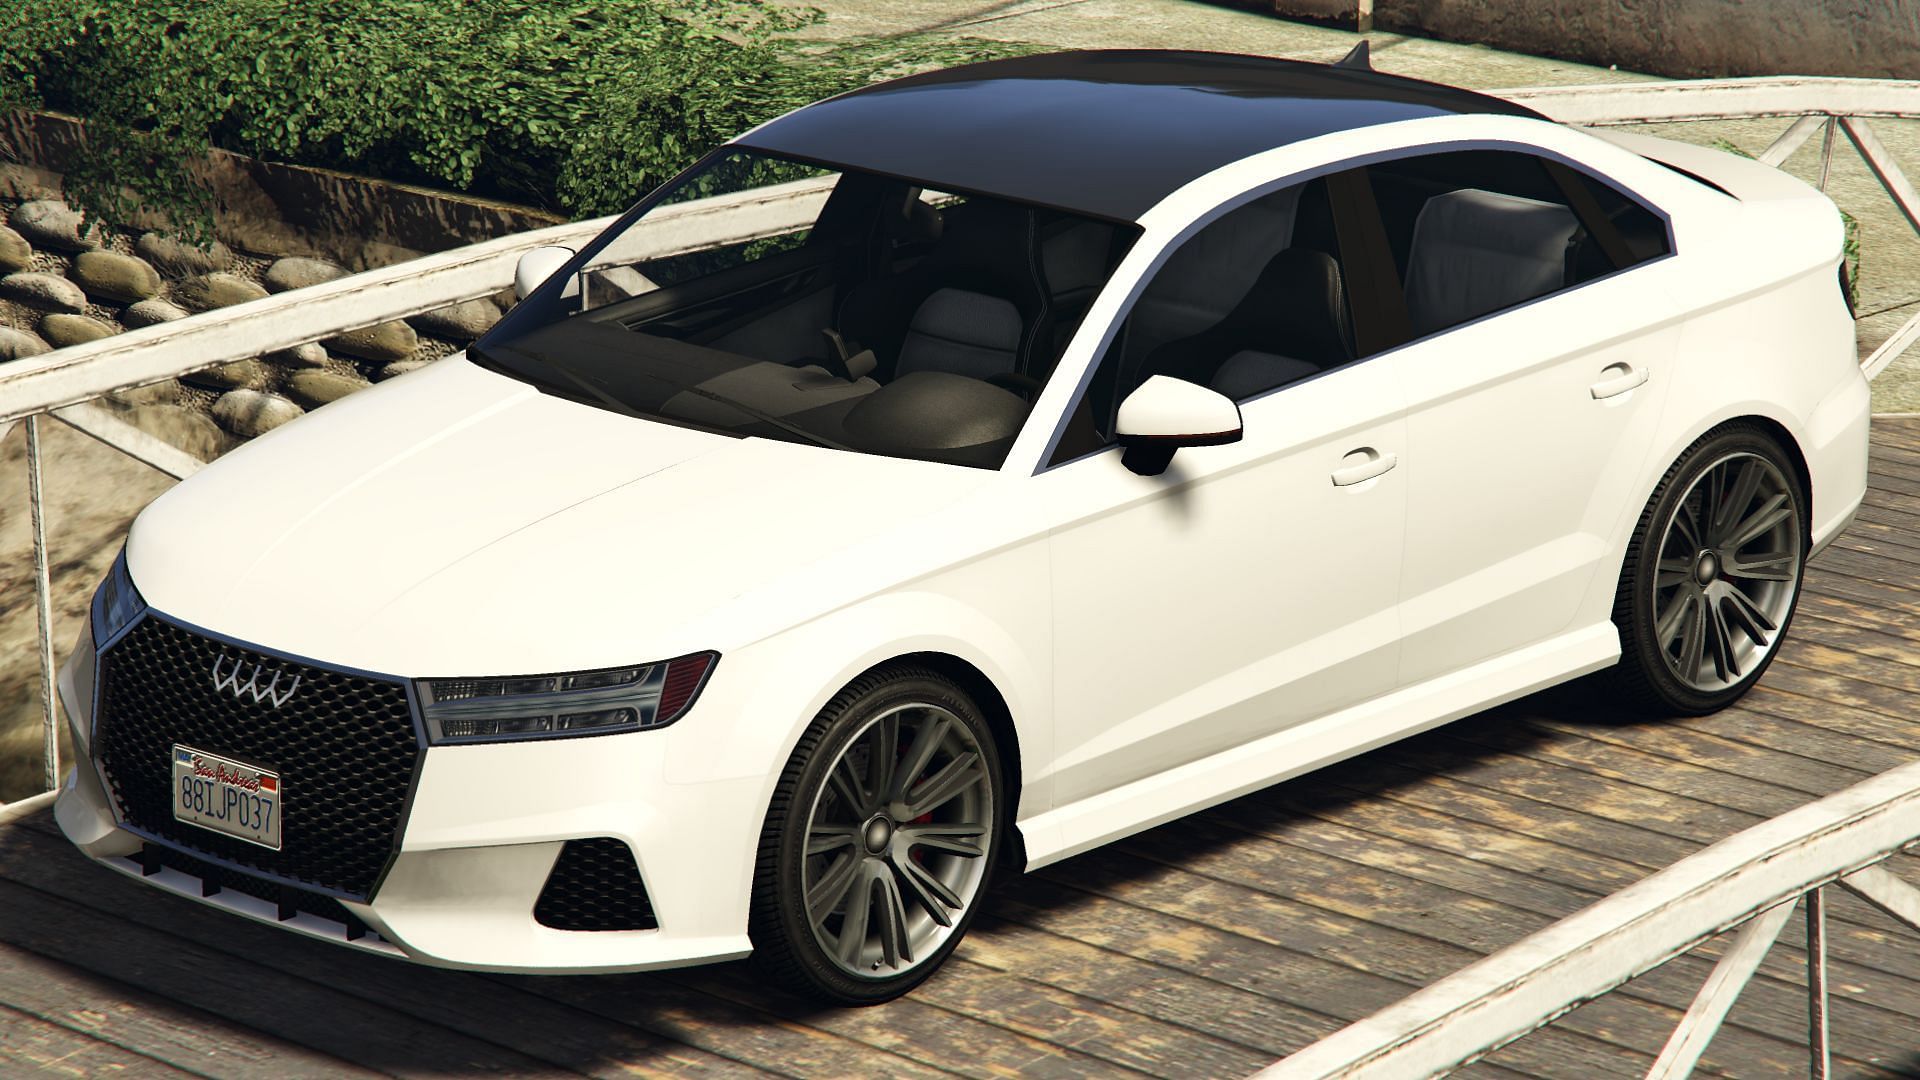 The Obey Tailgater S in GTA Online (Image via GTAWiki)